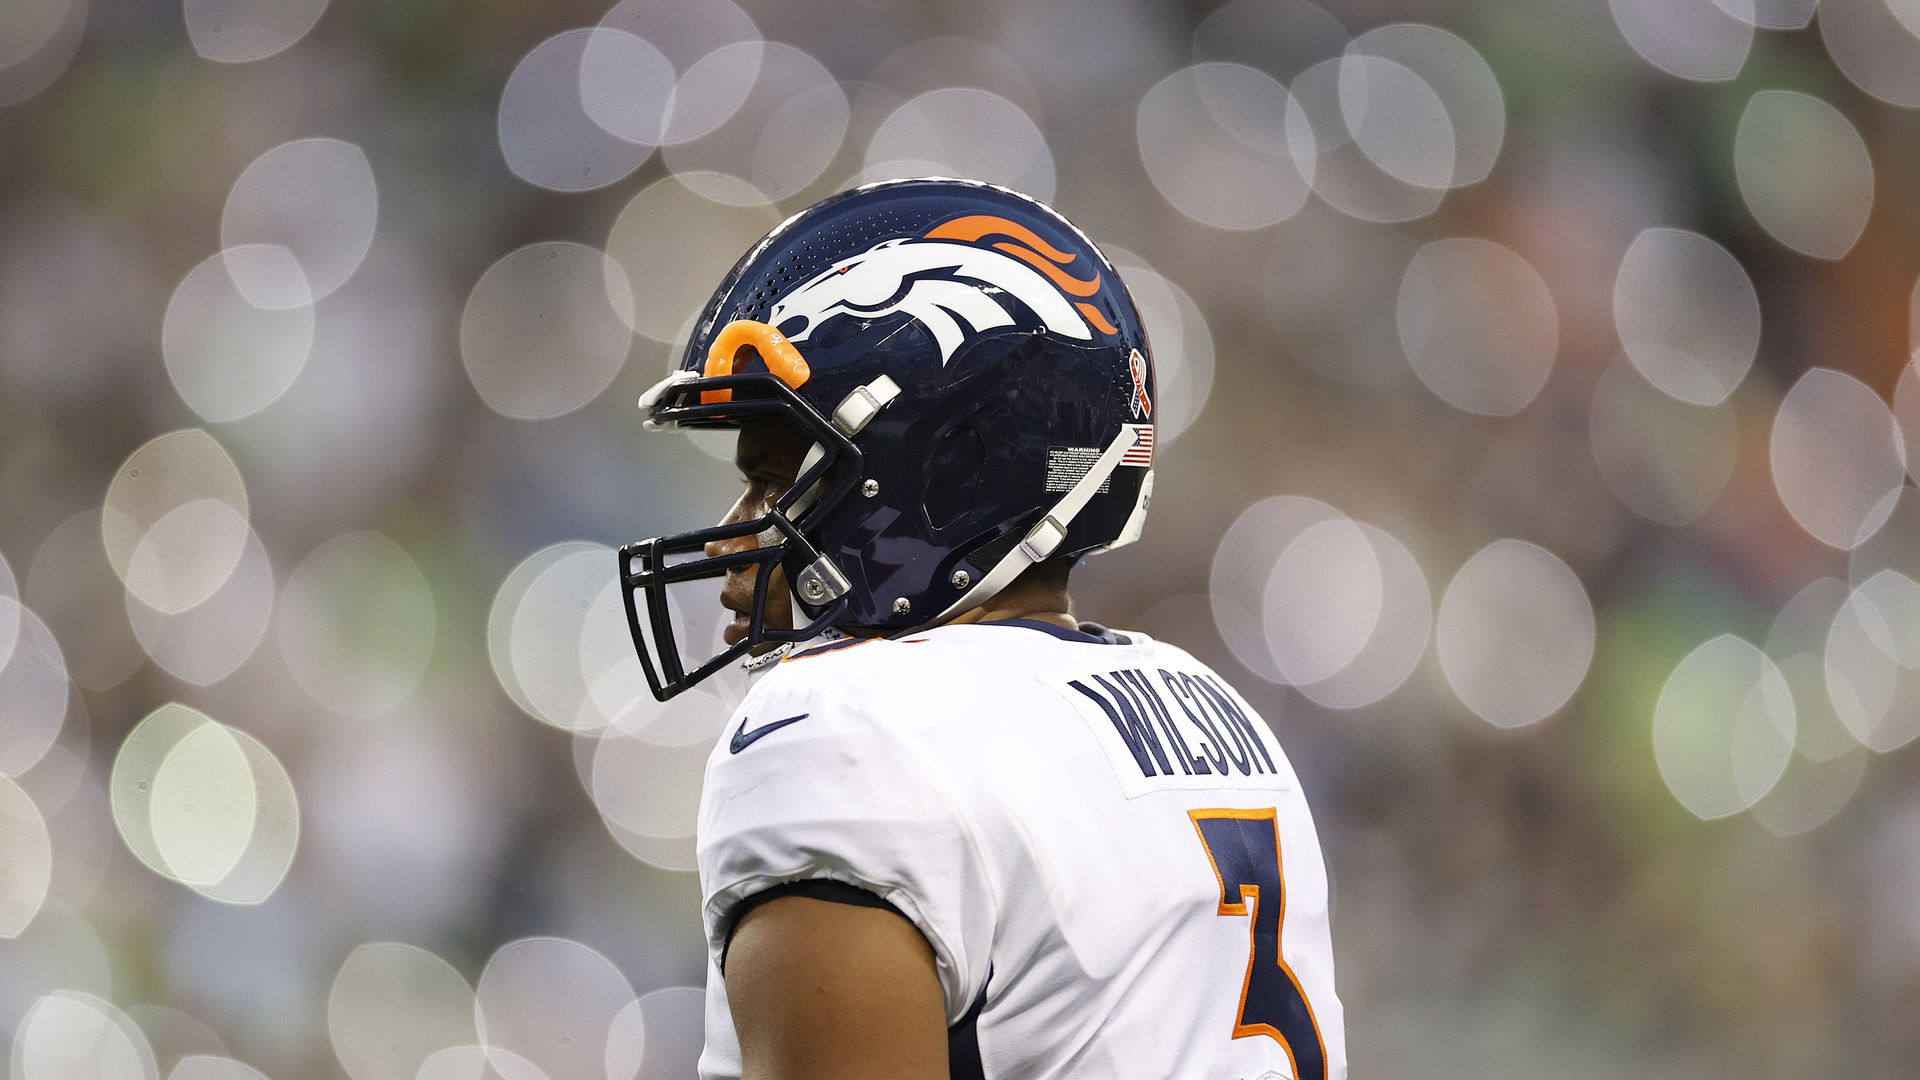 The Broncos' Russell Wilson on Monday night. Photo: Steph Chambers/Getty Images